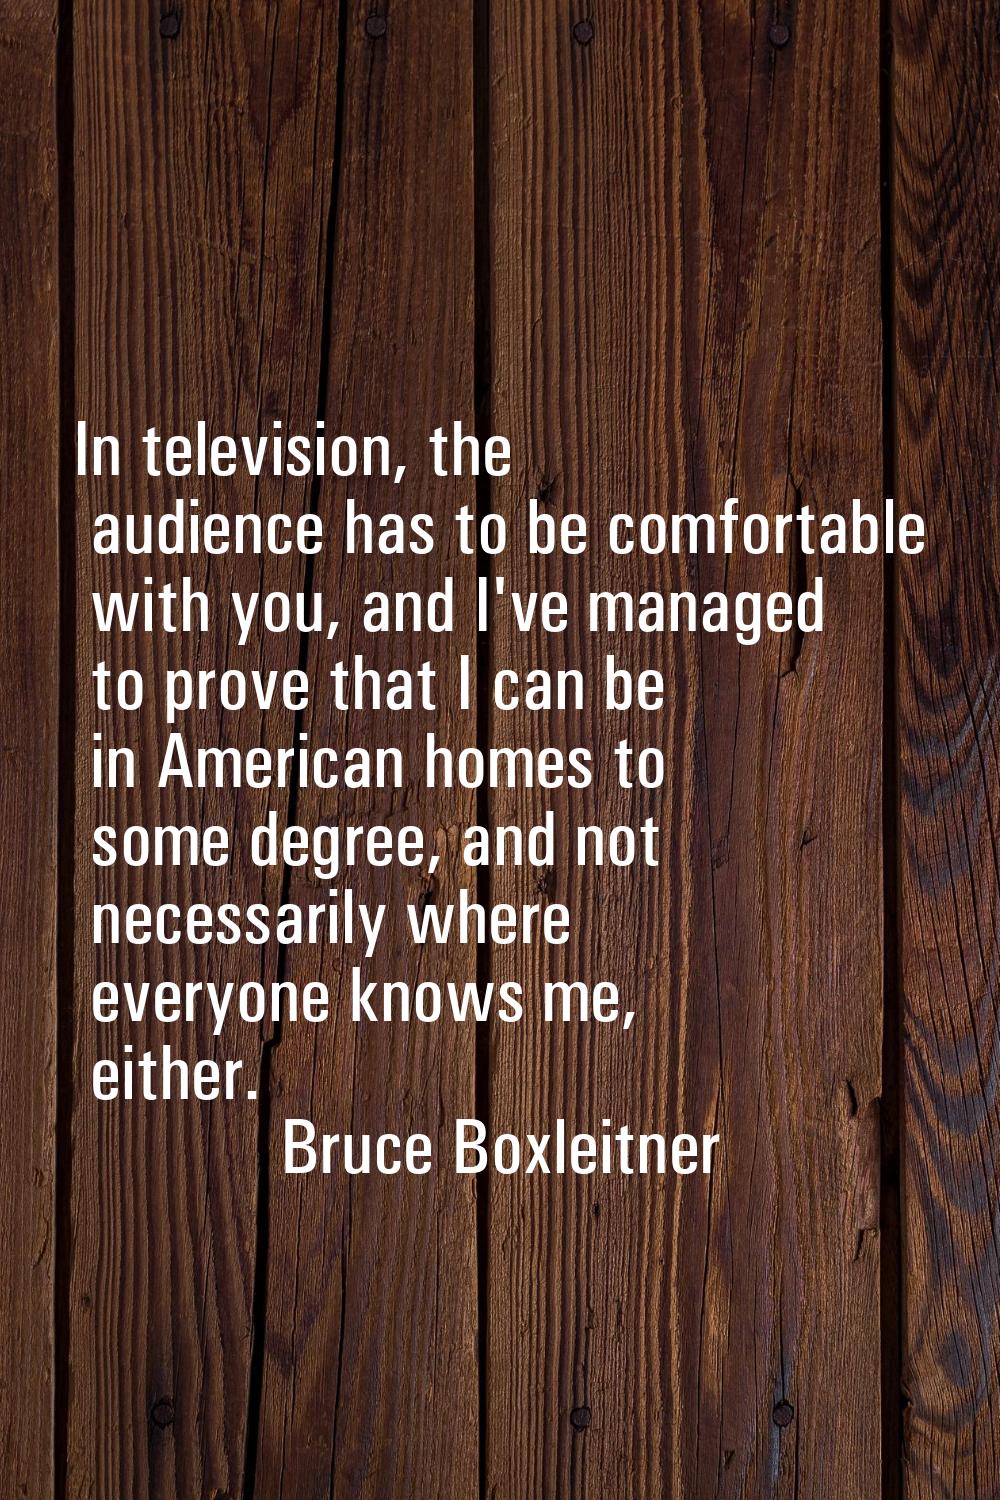 In television, the audience has to be comfortable with you, and I've managed to prove that I can be